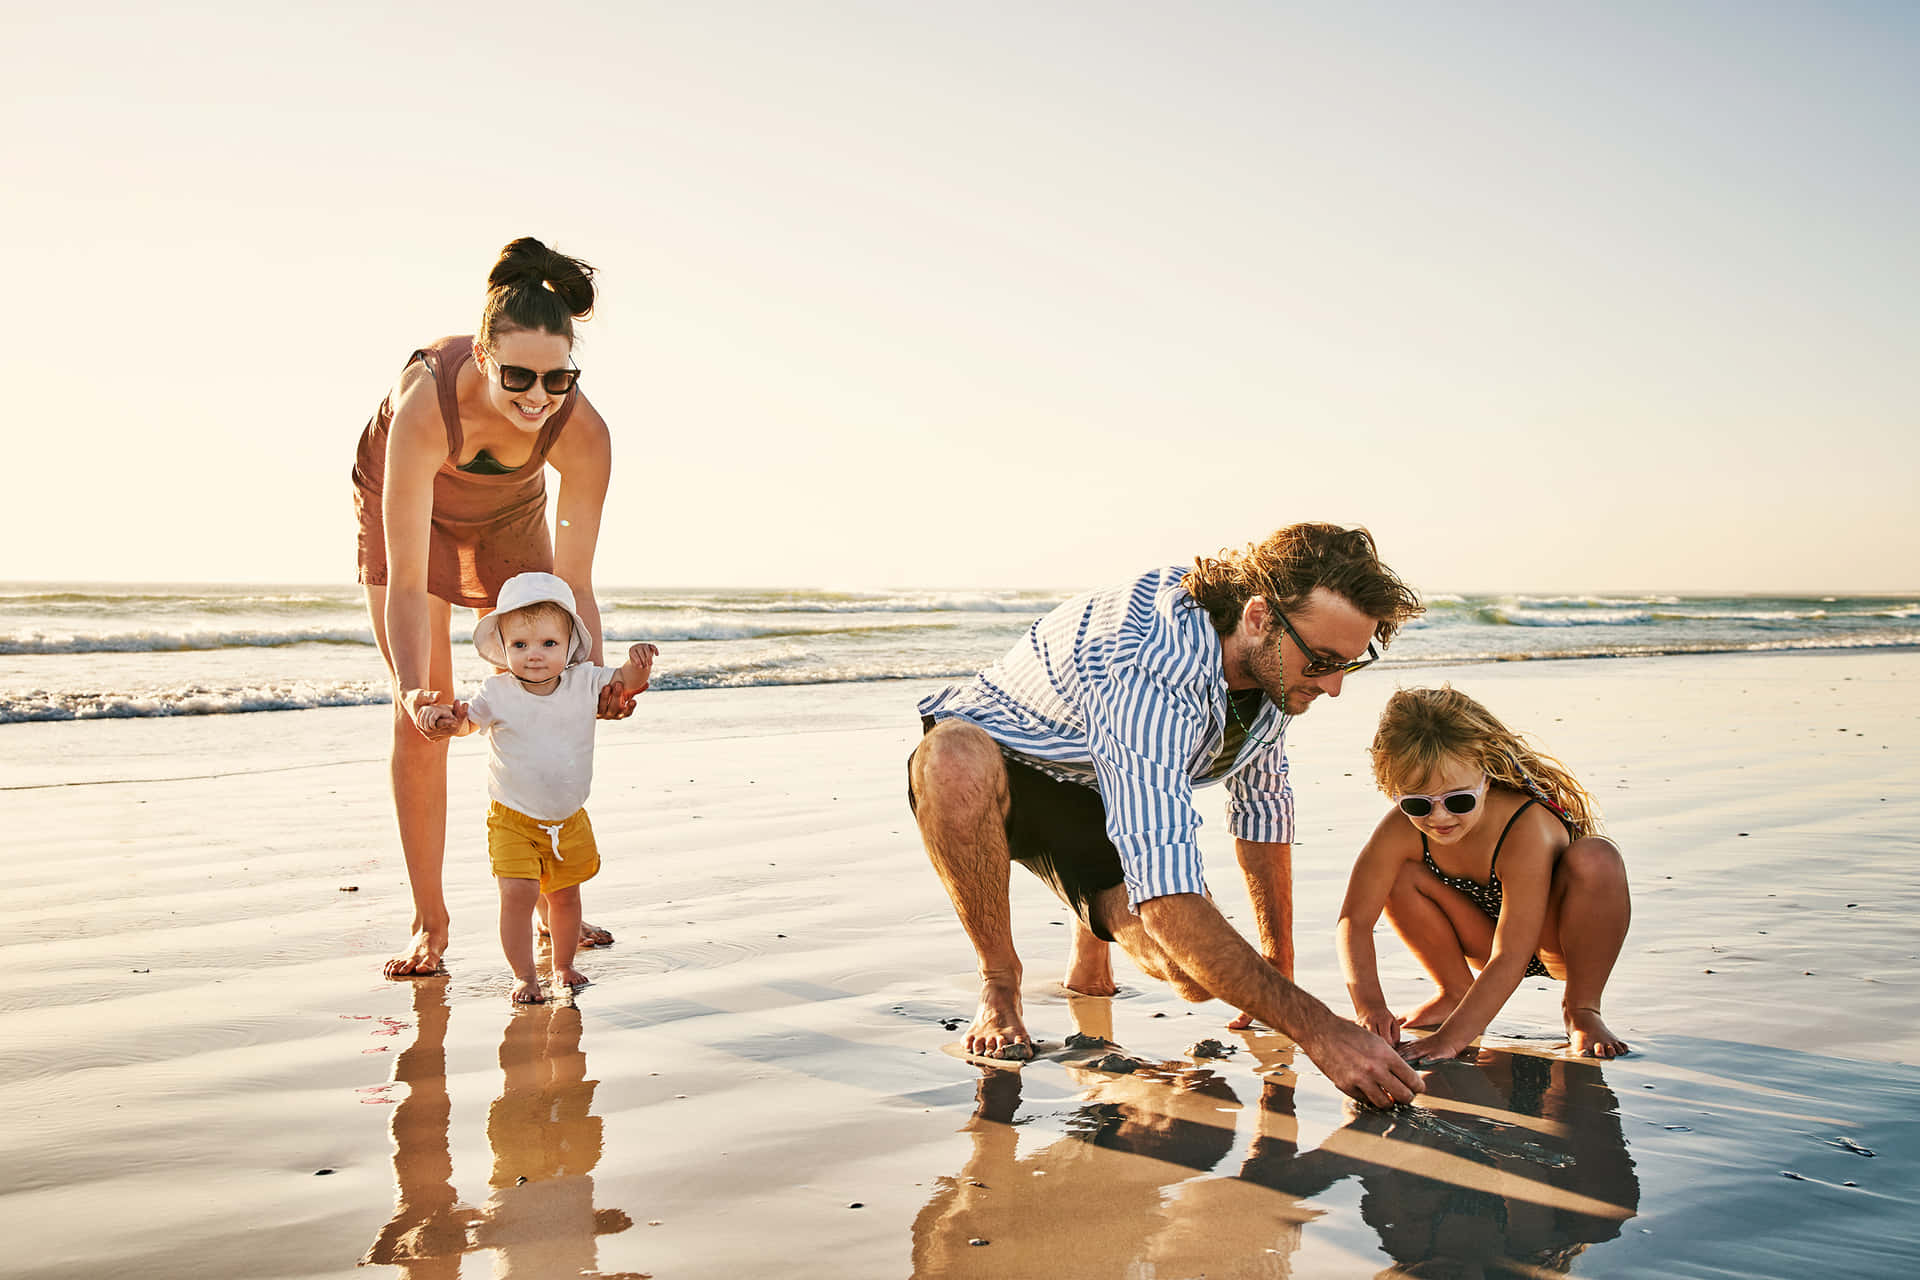 Spend quality time with your family by the beach!